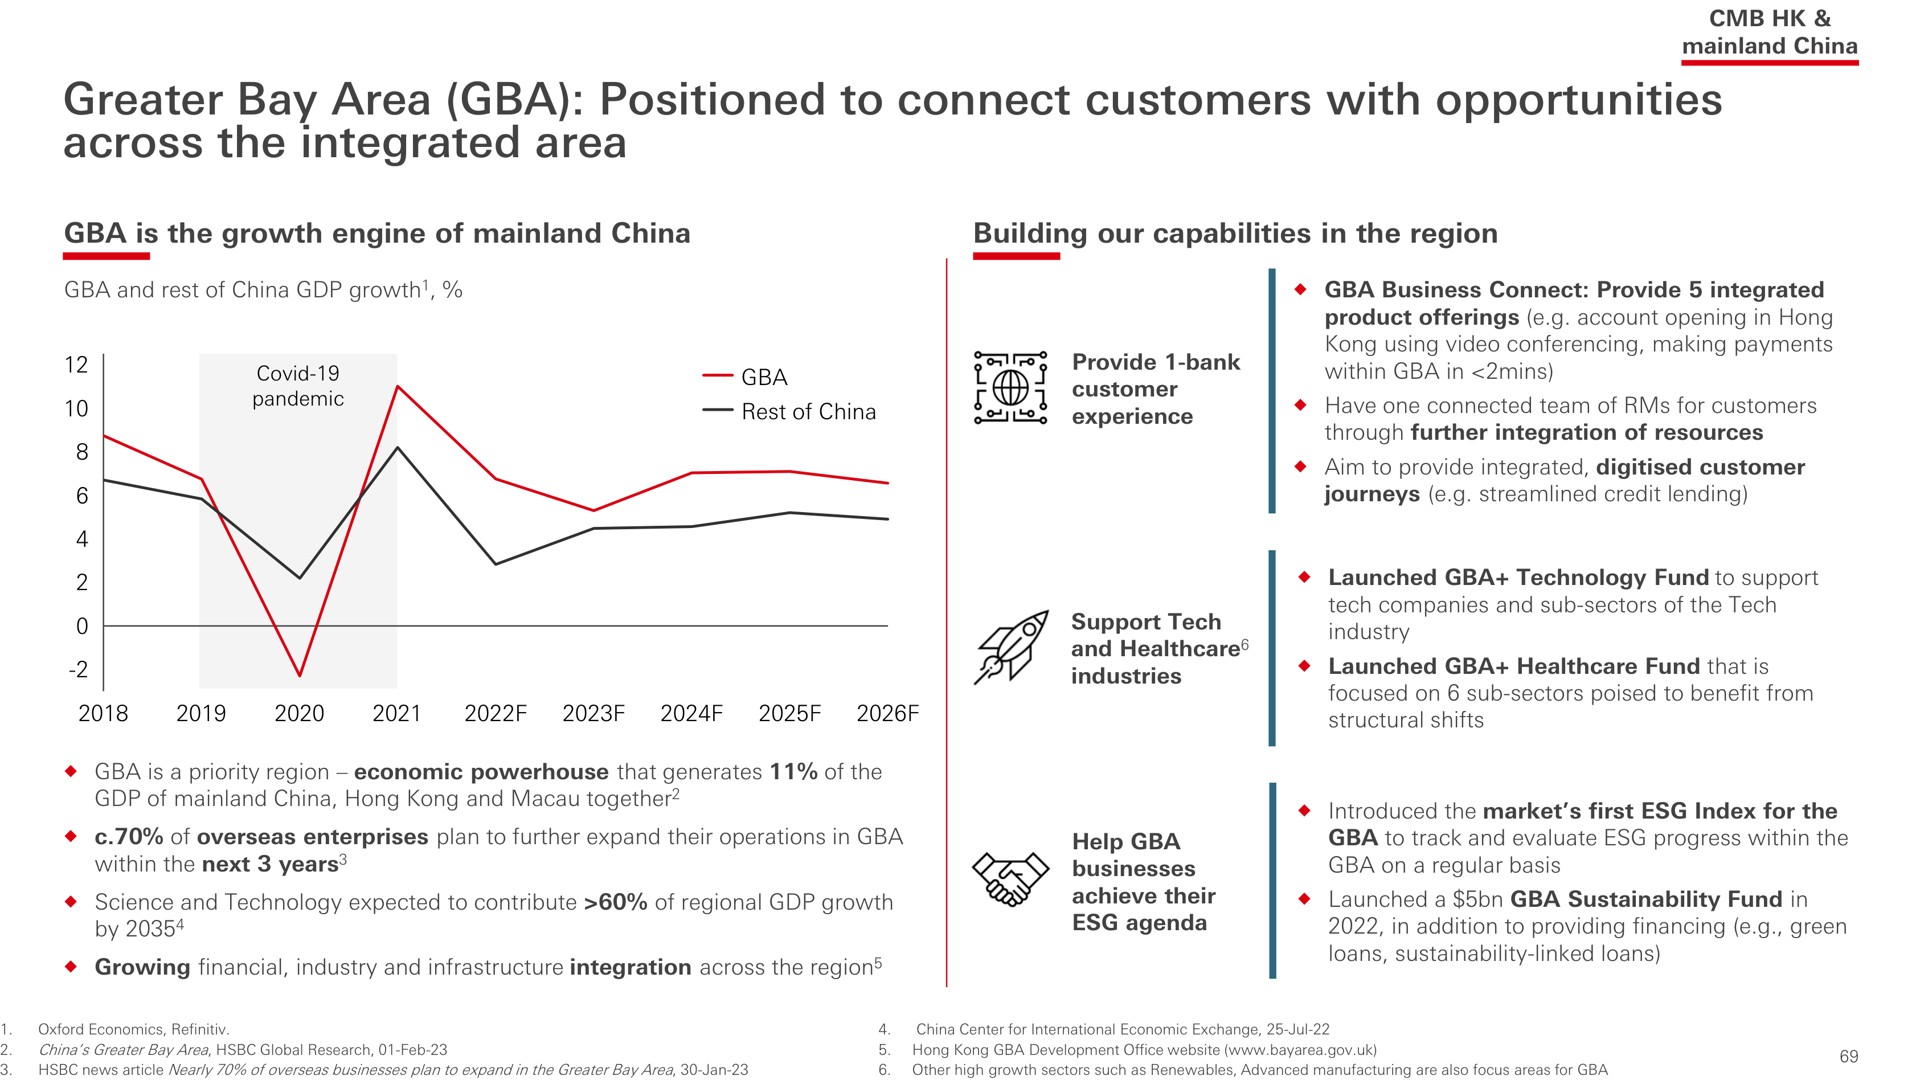 greater bay area positioned to connect customers with opportunities across the integrated area | HSBC